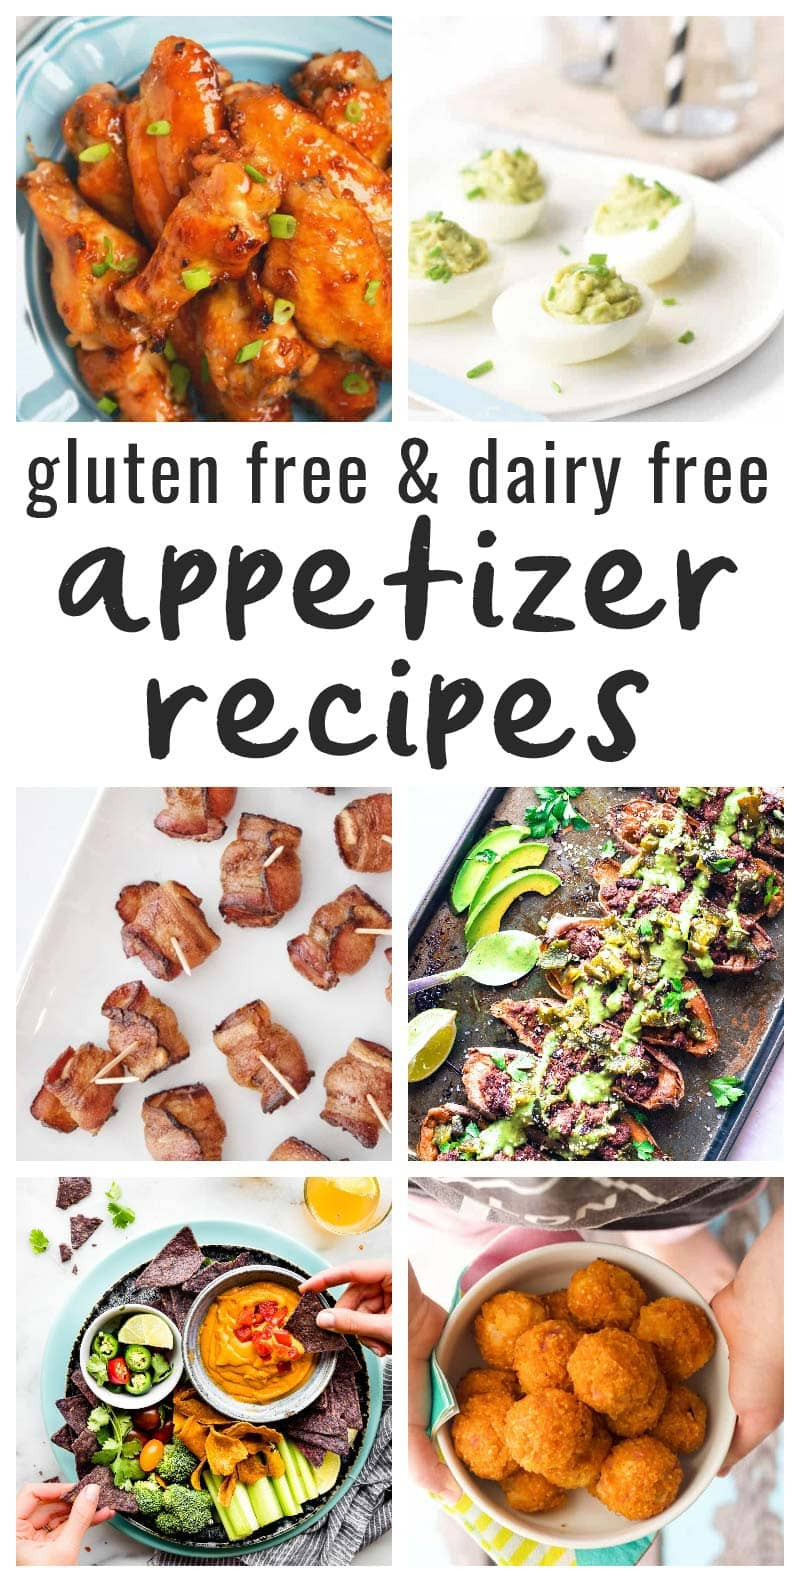 Gluten And Dairy Free Appetizers
 45 Dairy Free and Gluten Free Appetizers • The Fit Cookie